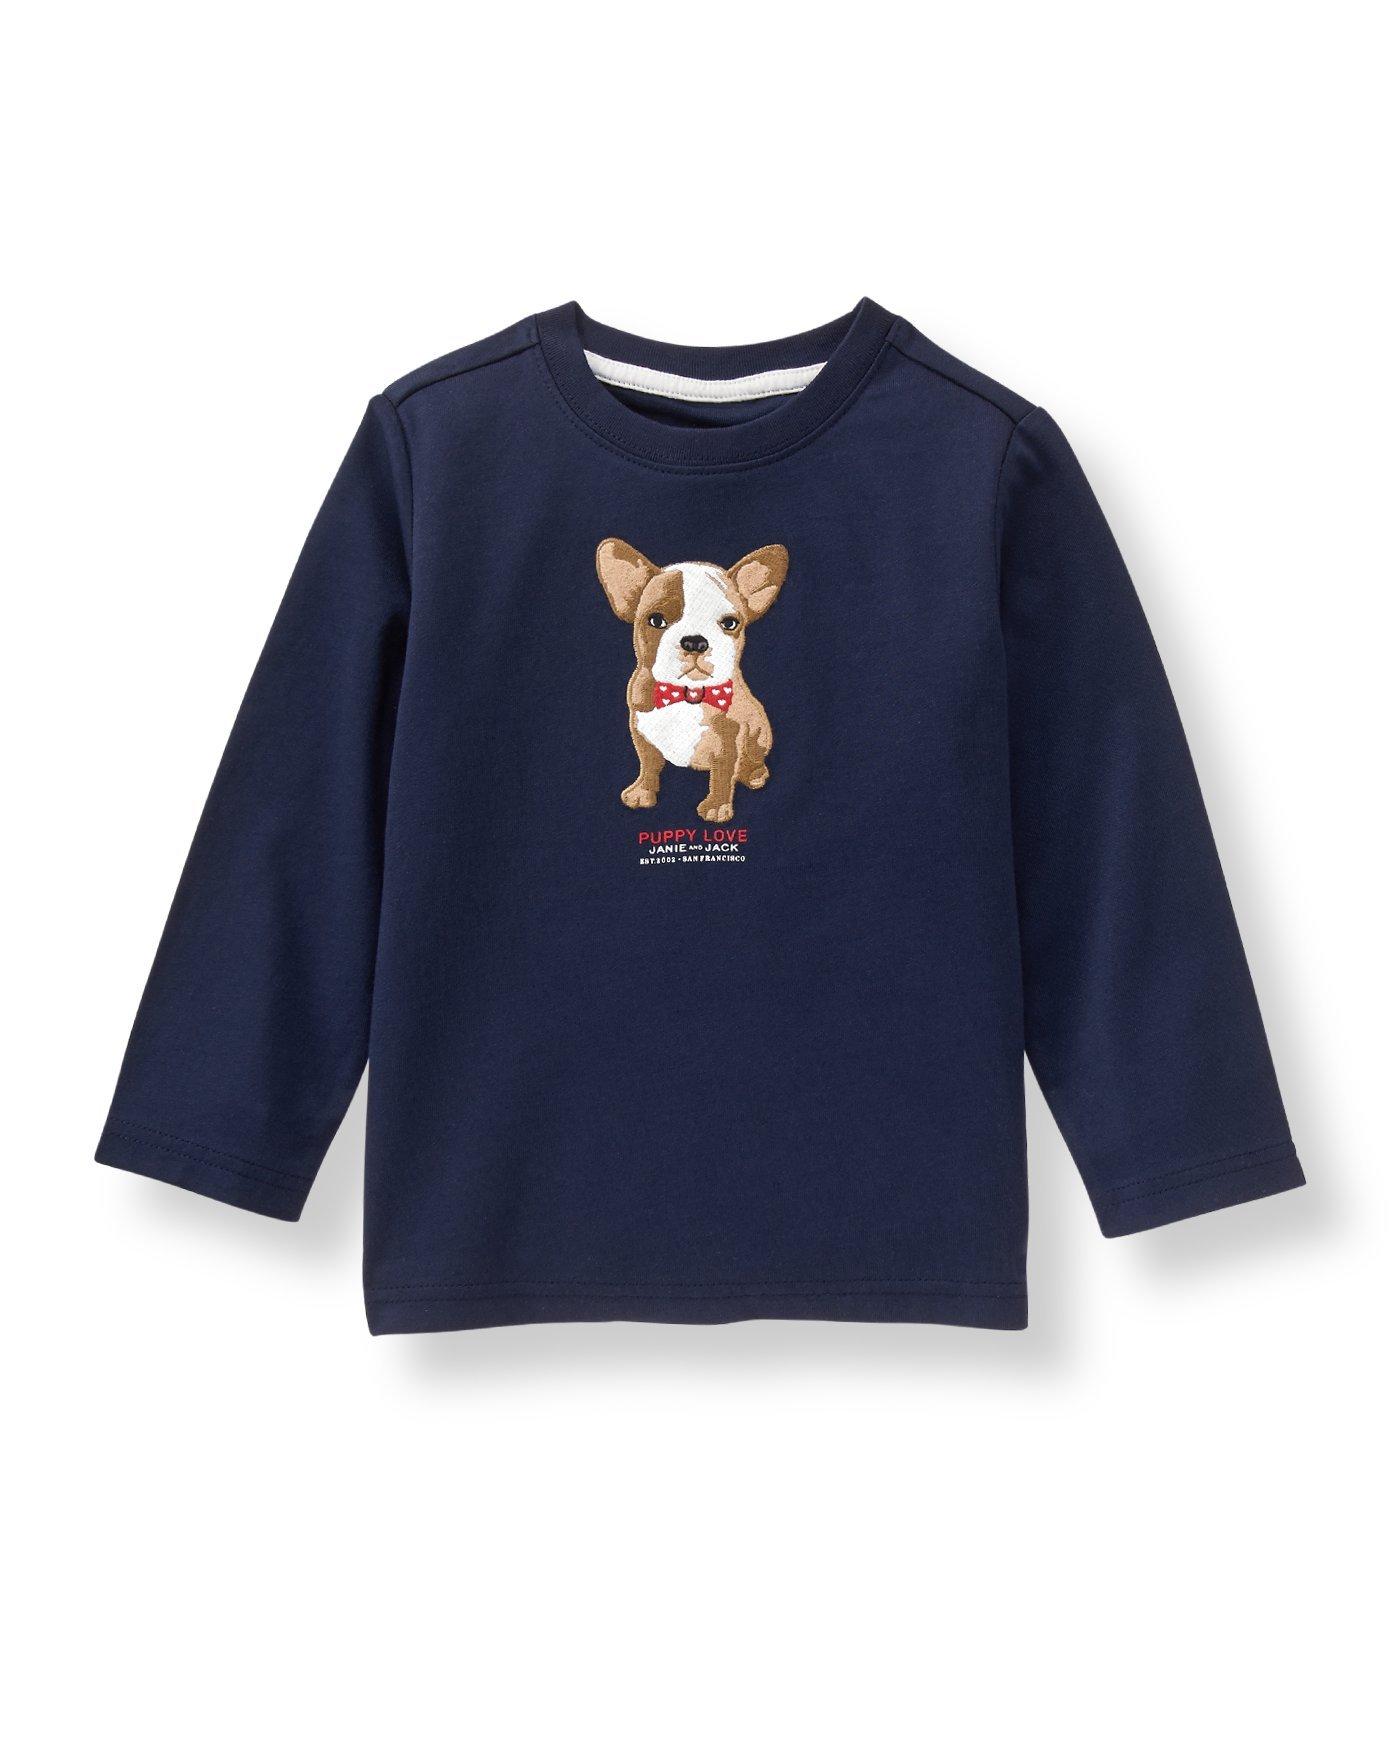 Puppy Love Tee image number 0